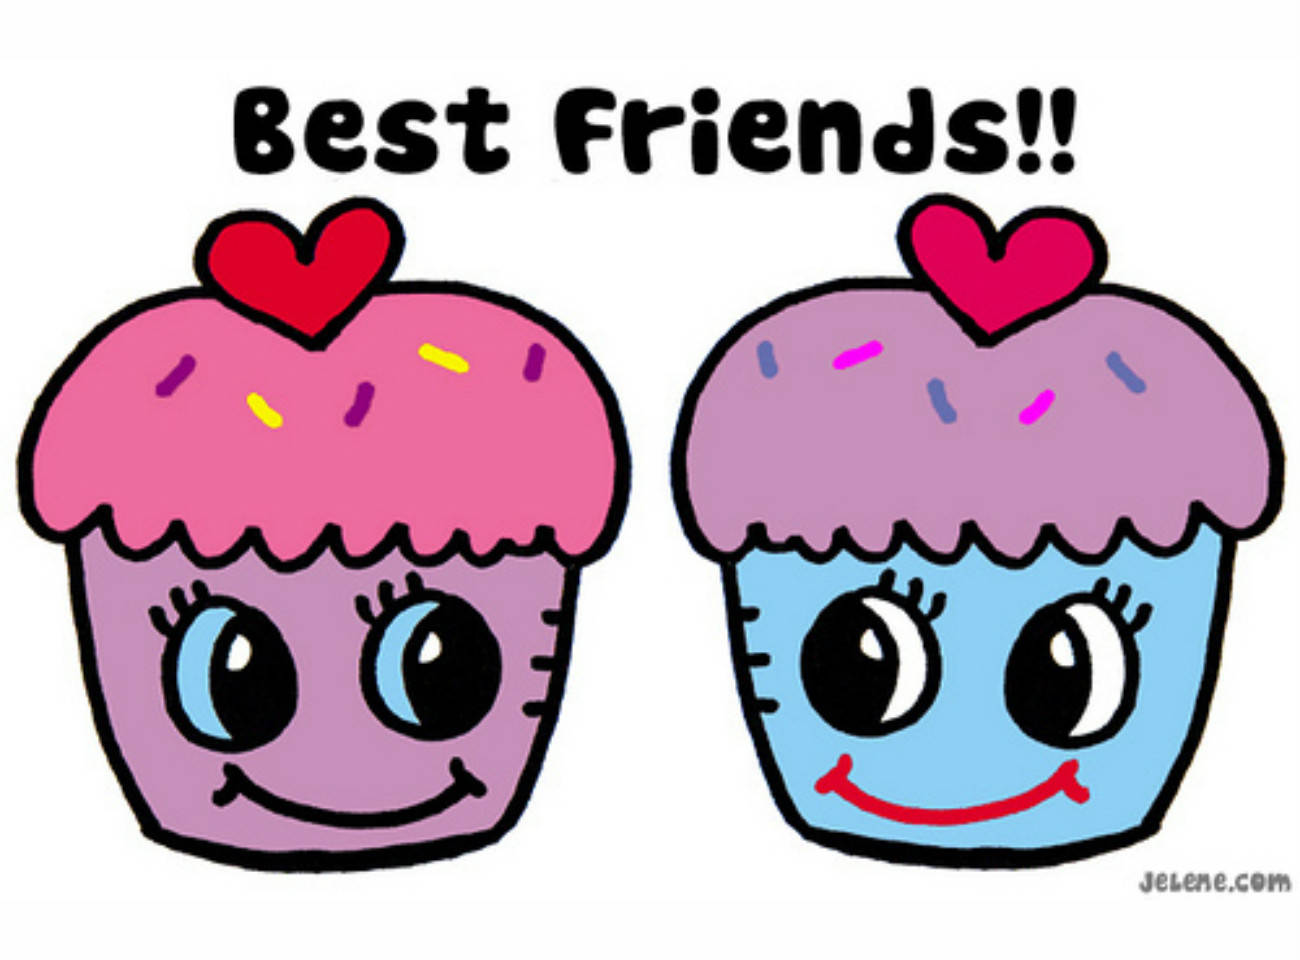 Best Friends Share Everything, Even Cupcakes! Background